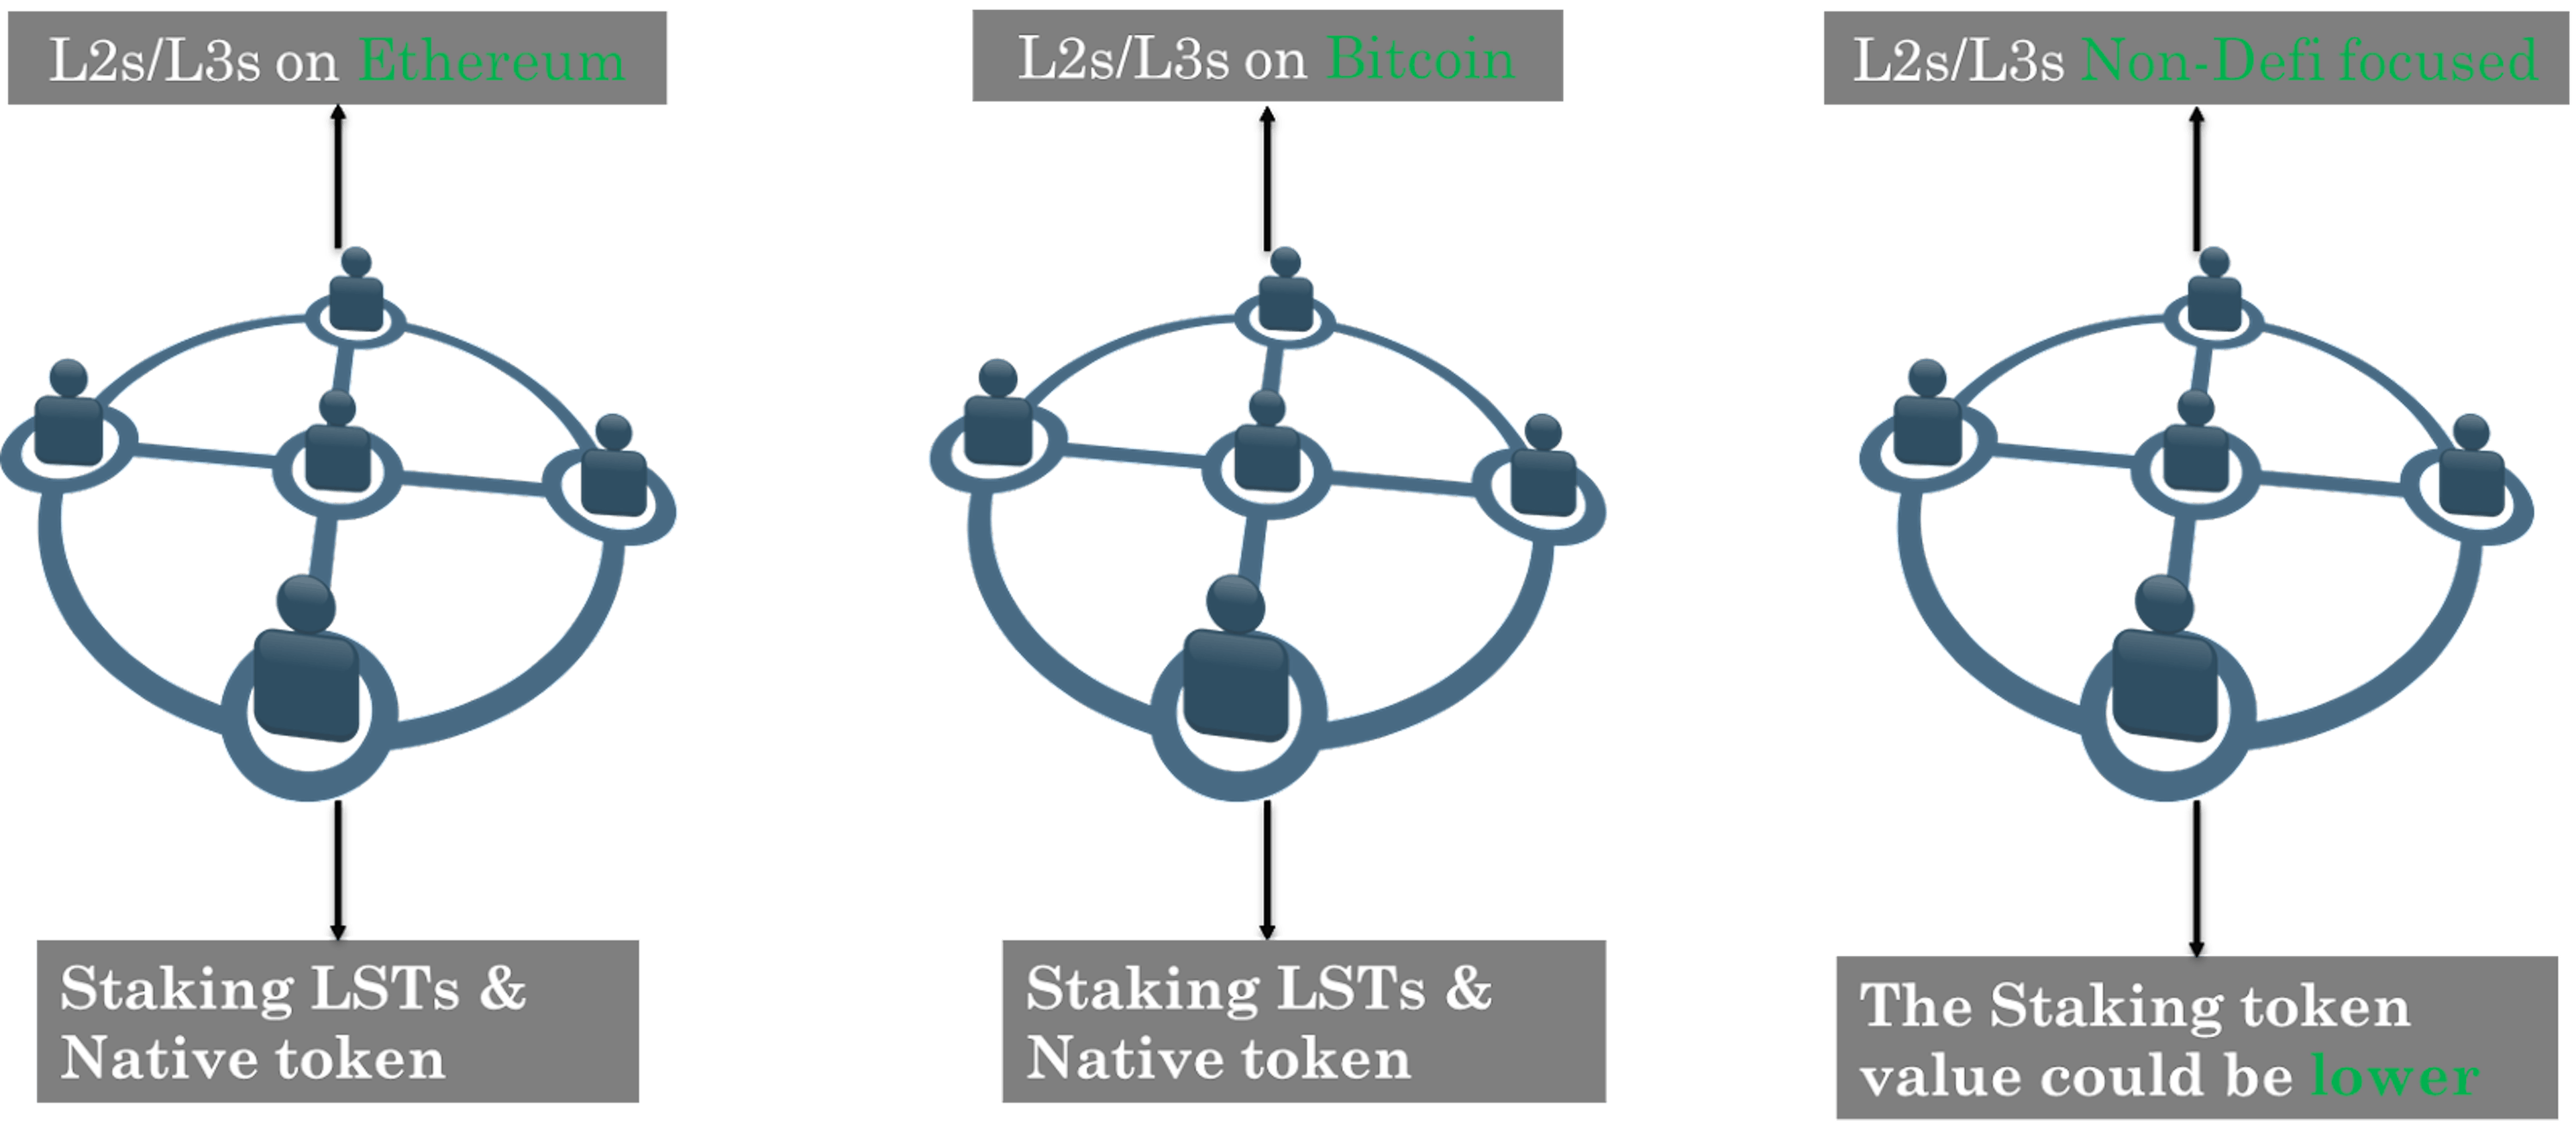 Fig5. The staking/re-staking cases